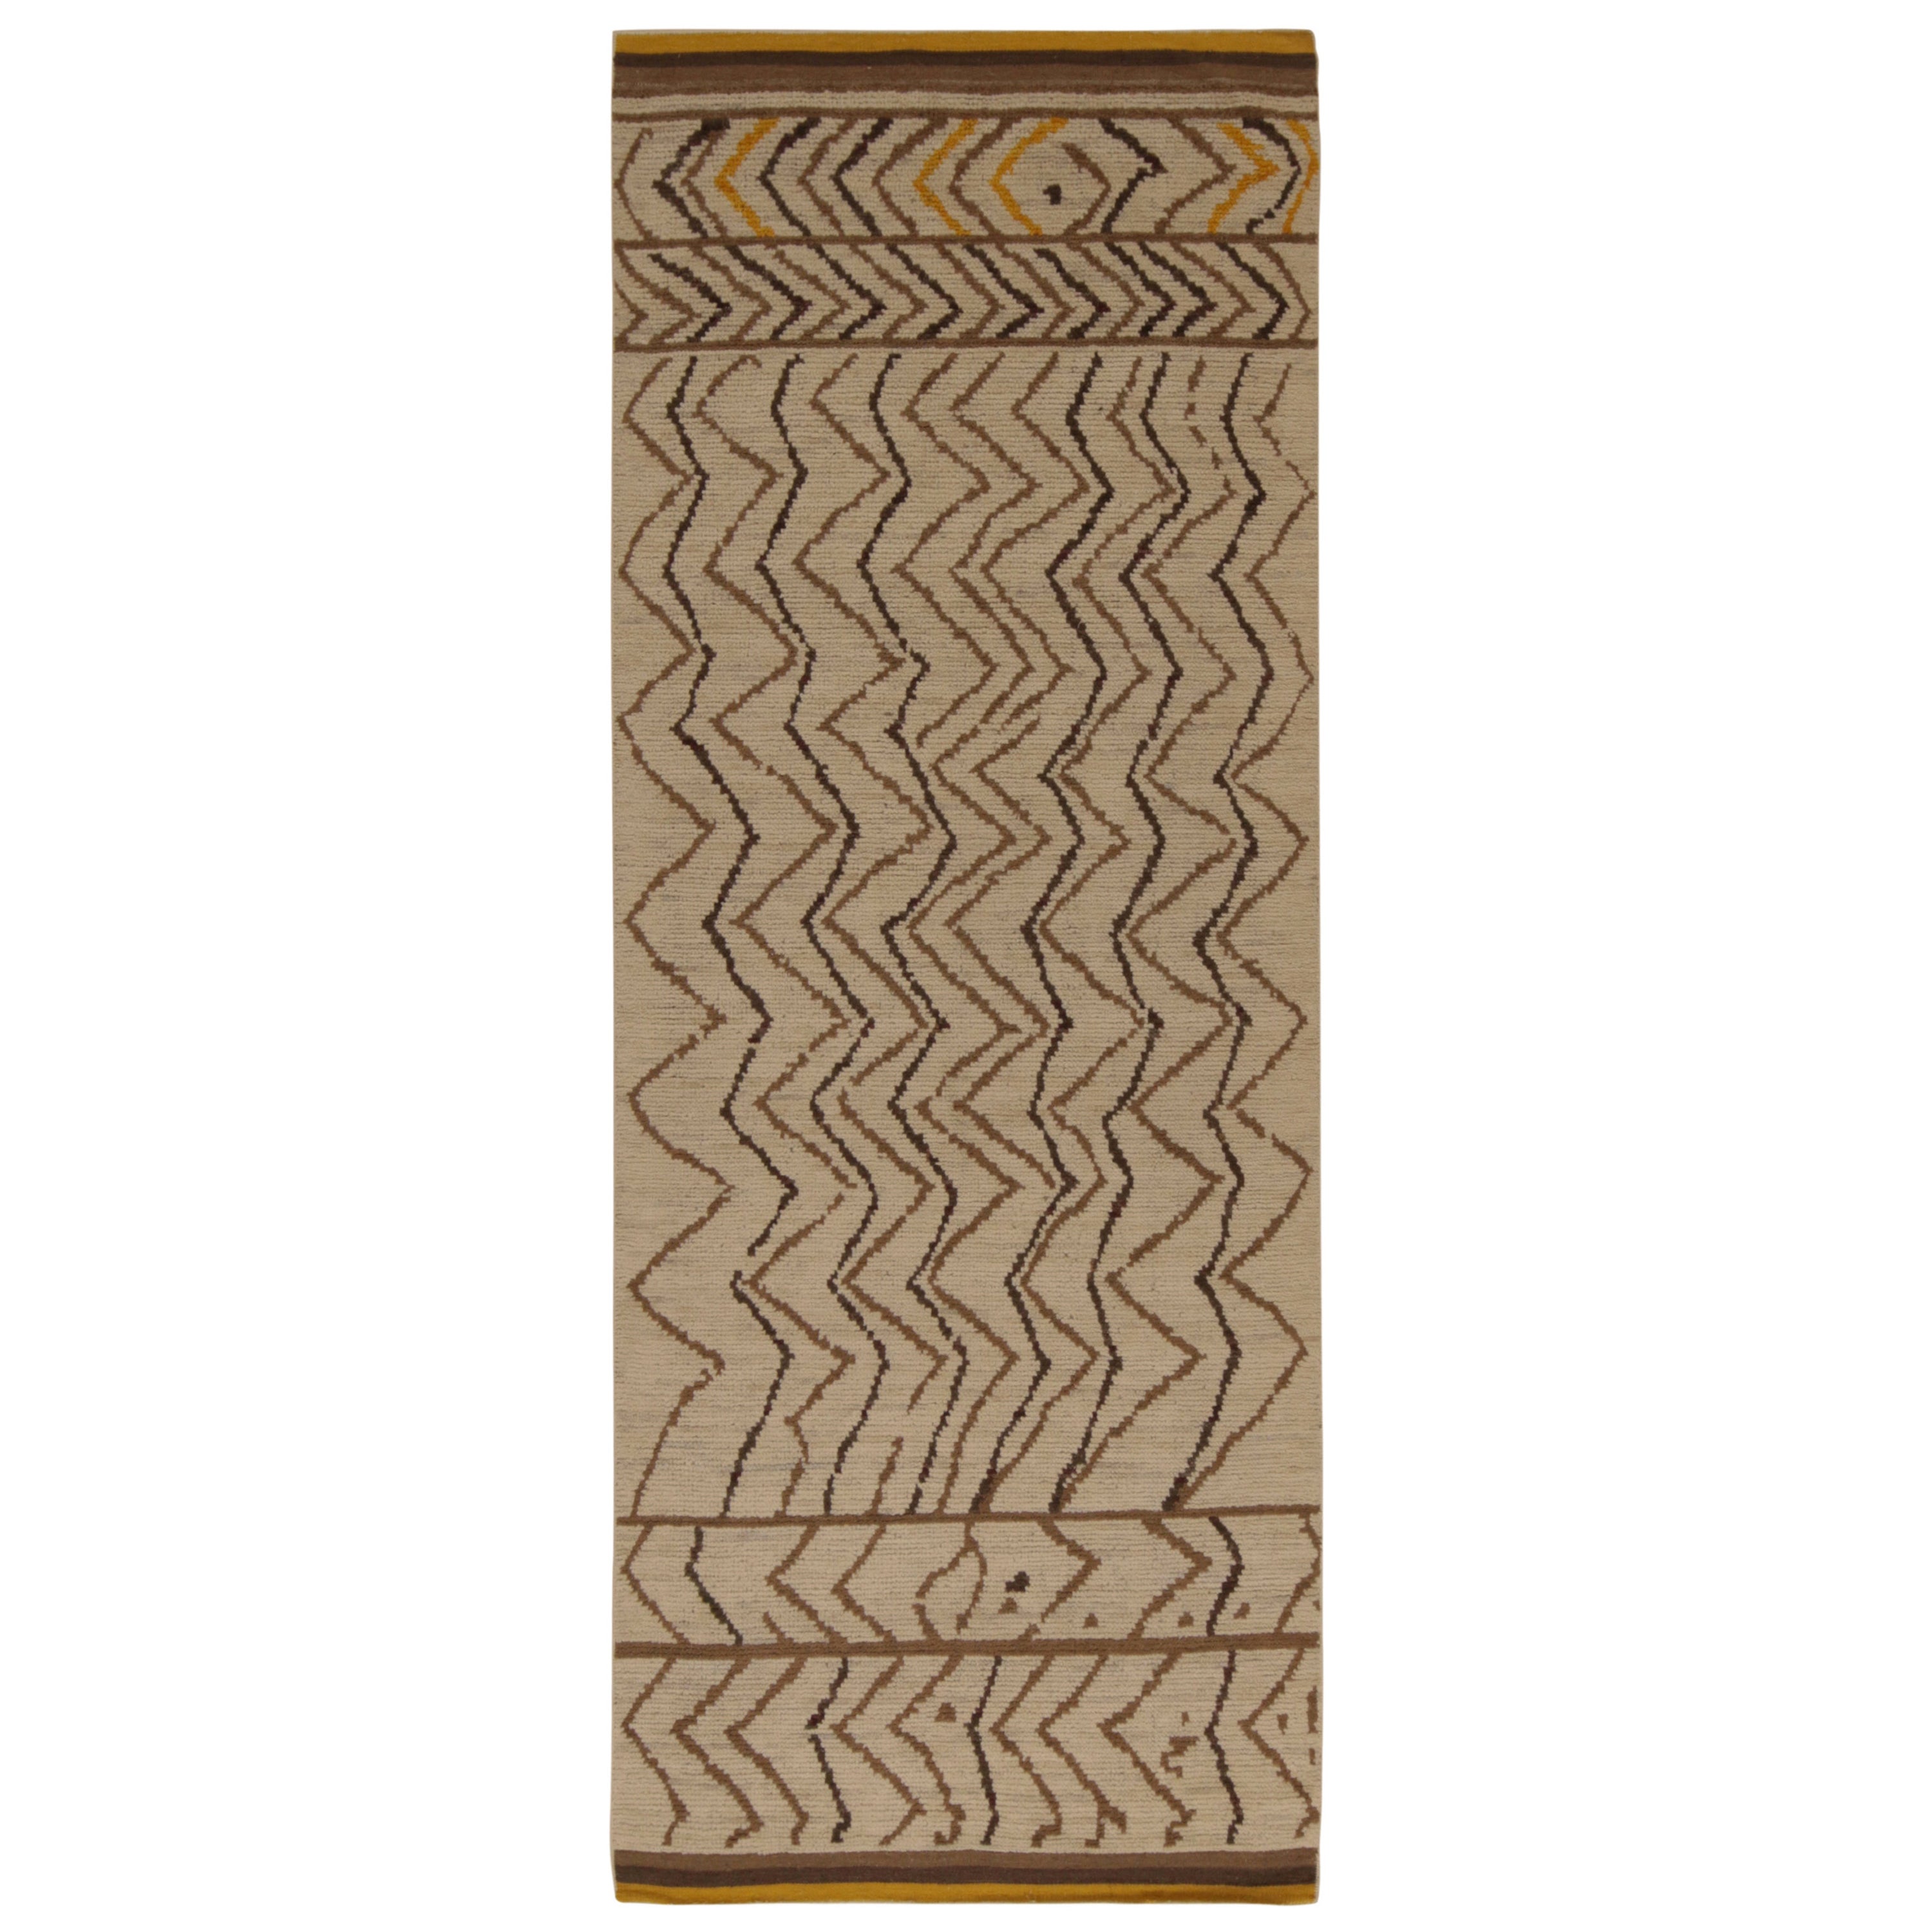 Rug & Kilim's Moroccan Style Rug in Beige-Brown Chevrons with Gold Accents (tapis de style marocain à chevrons beige et marron avec des accents dorés) en vente